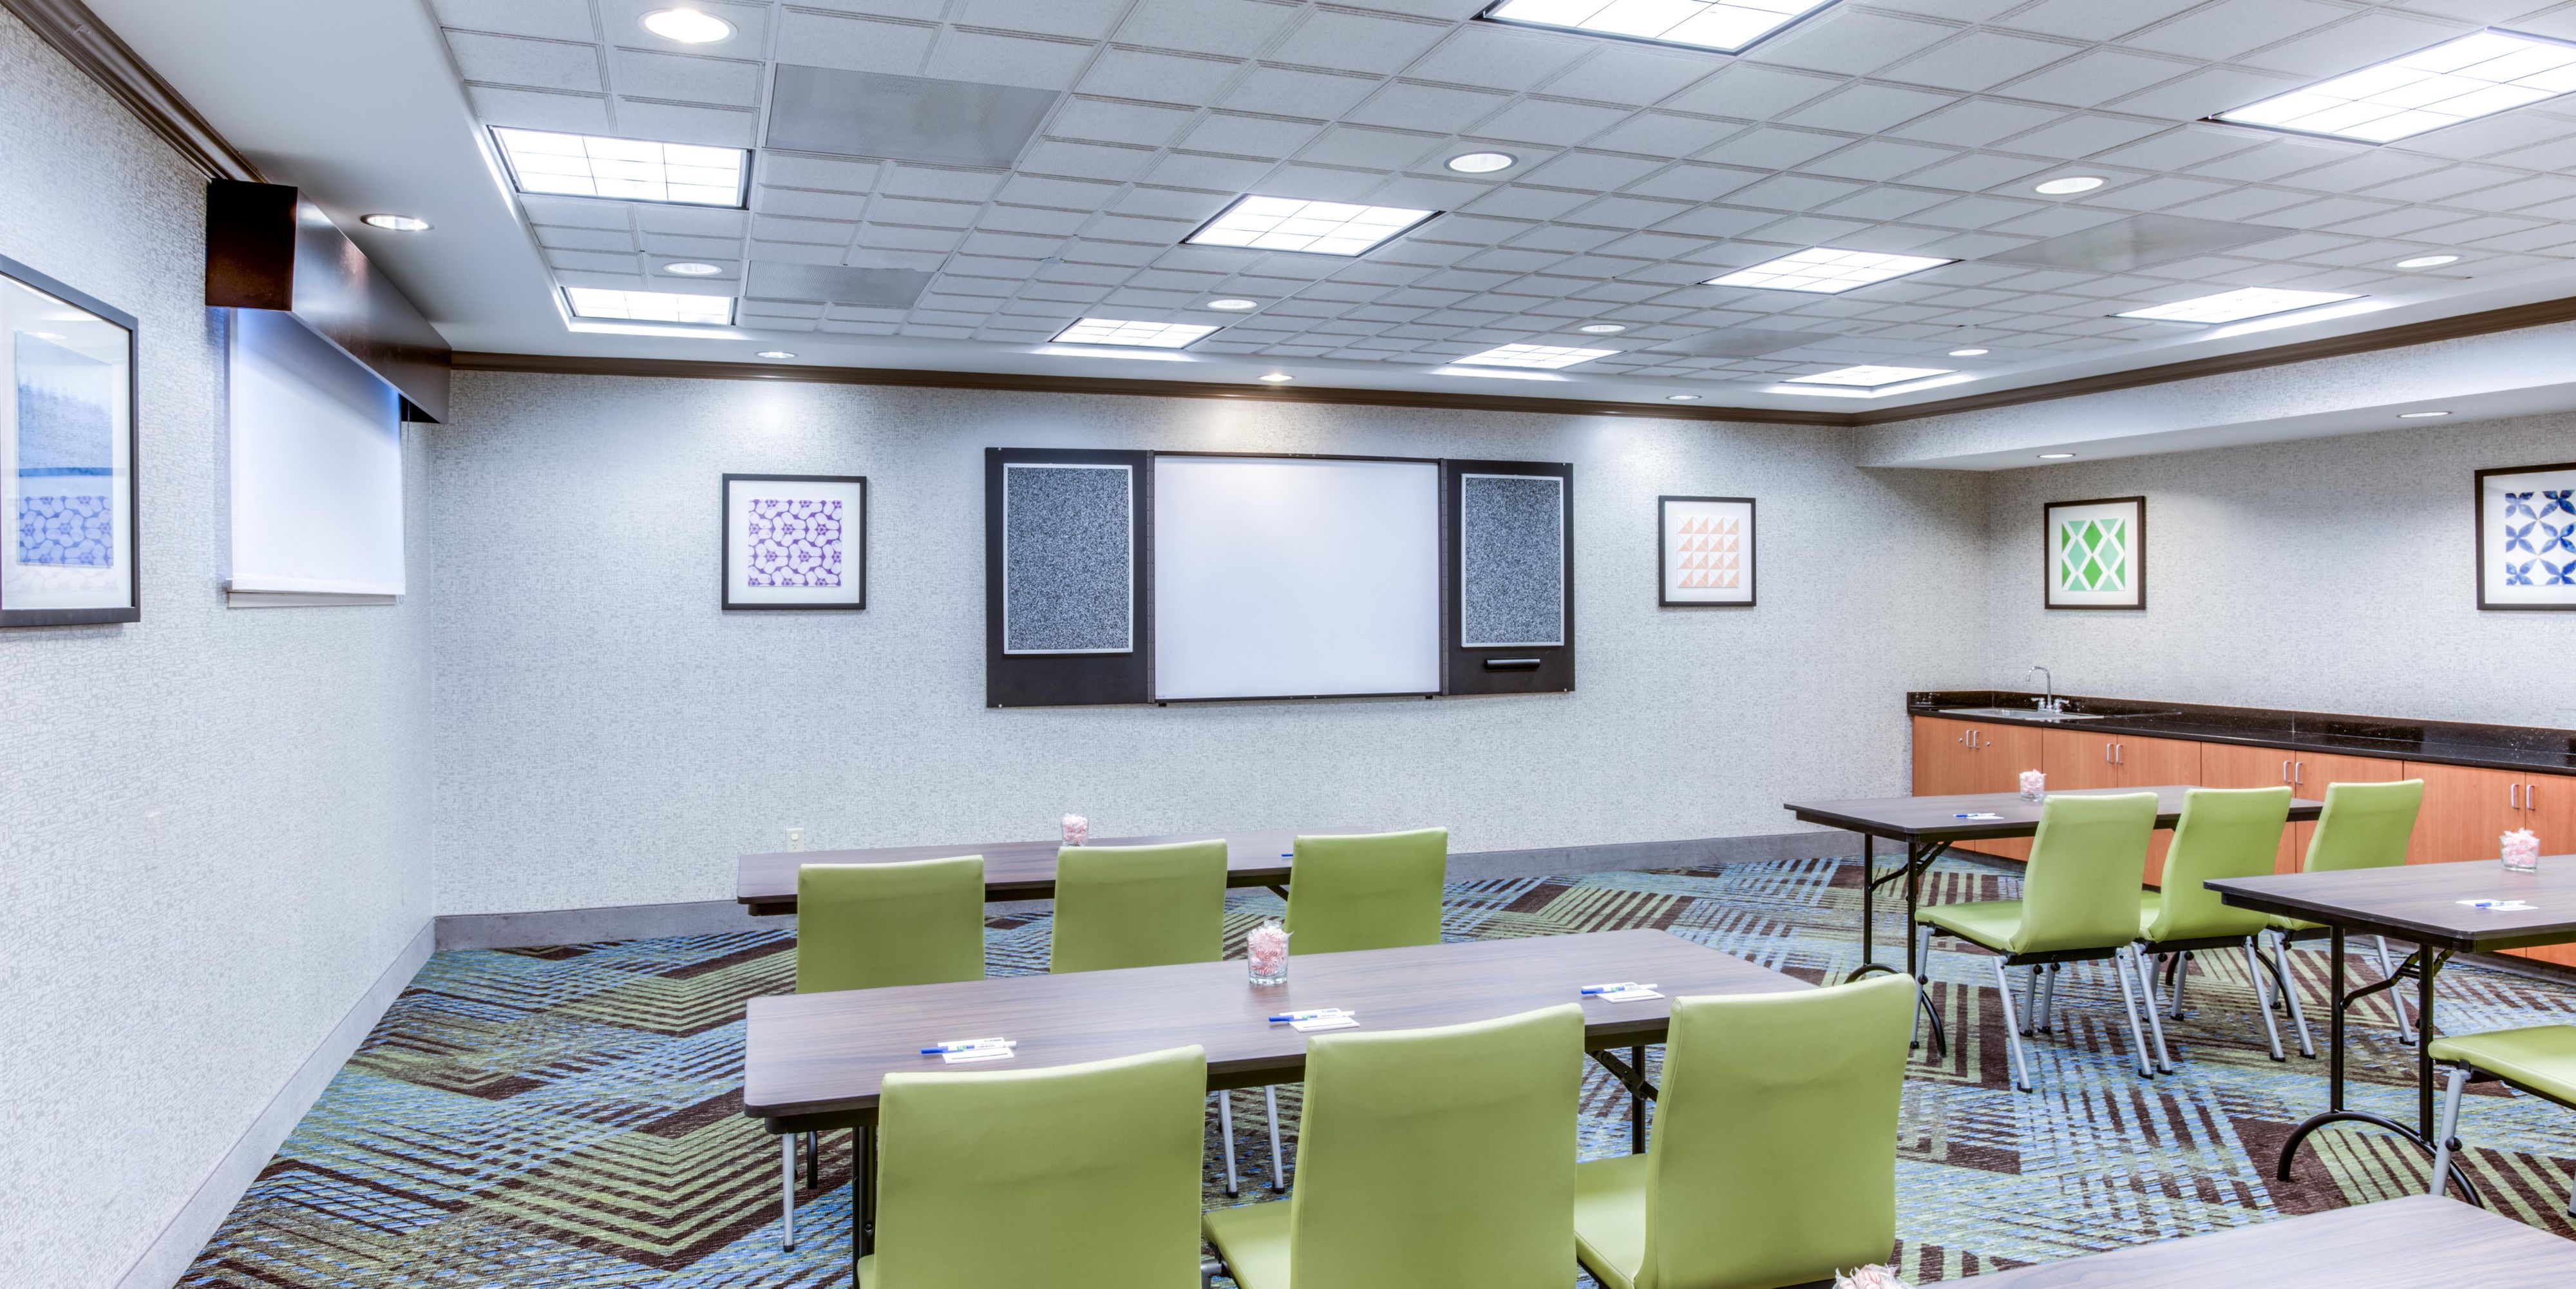 Our Lehigh Meeting Room (750 sq ft) can be set many ways, including Banquet, Conference, Classroom, U-Shape, Theater, and more. 